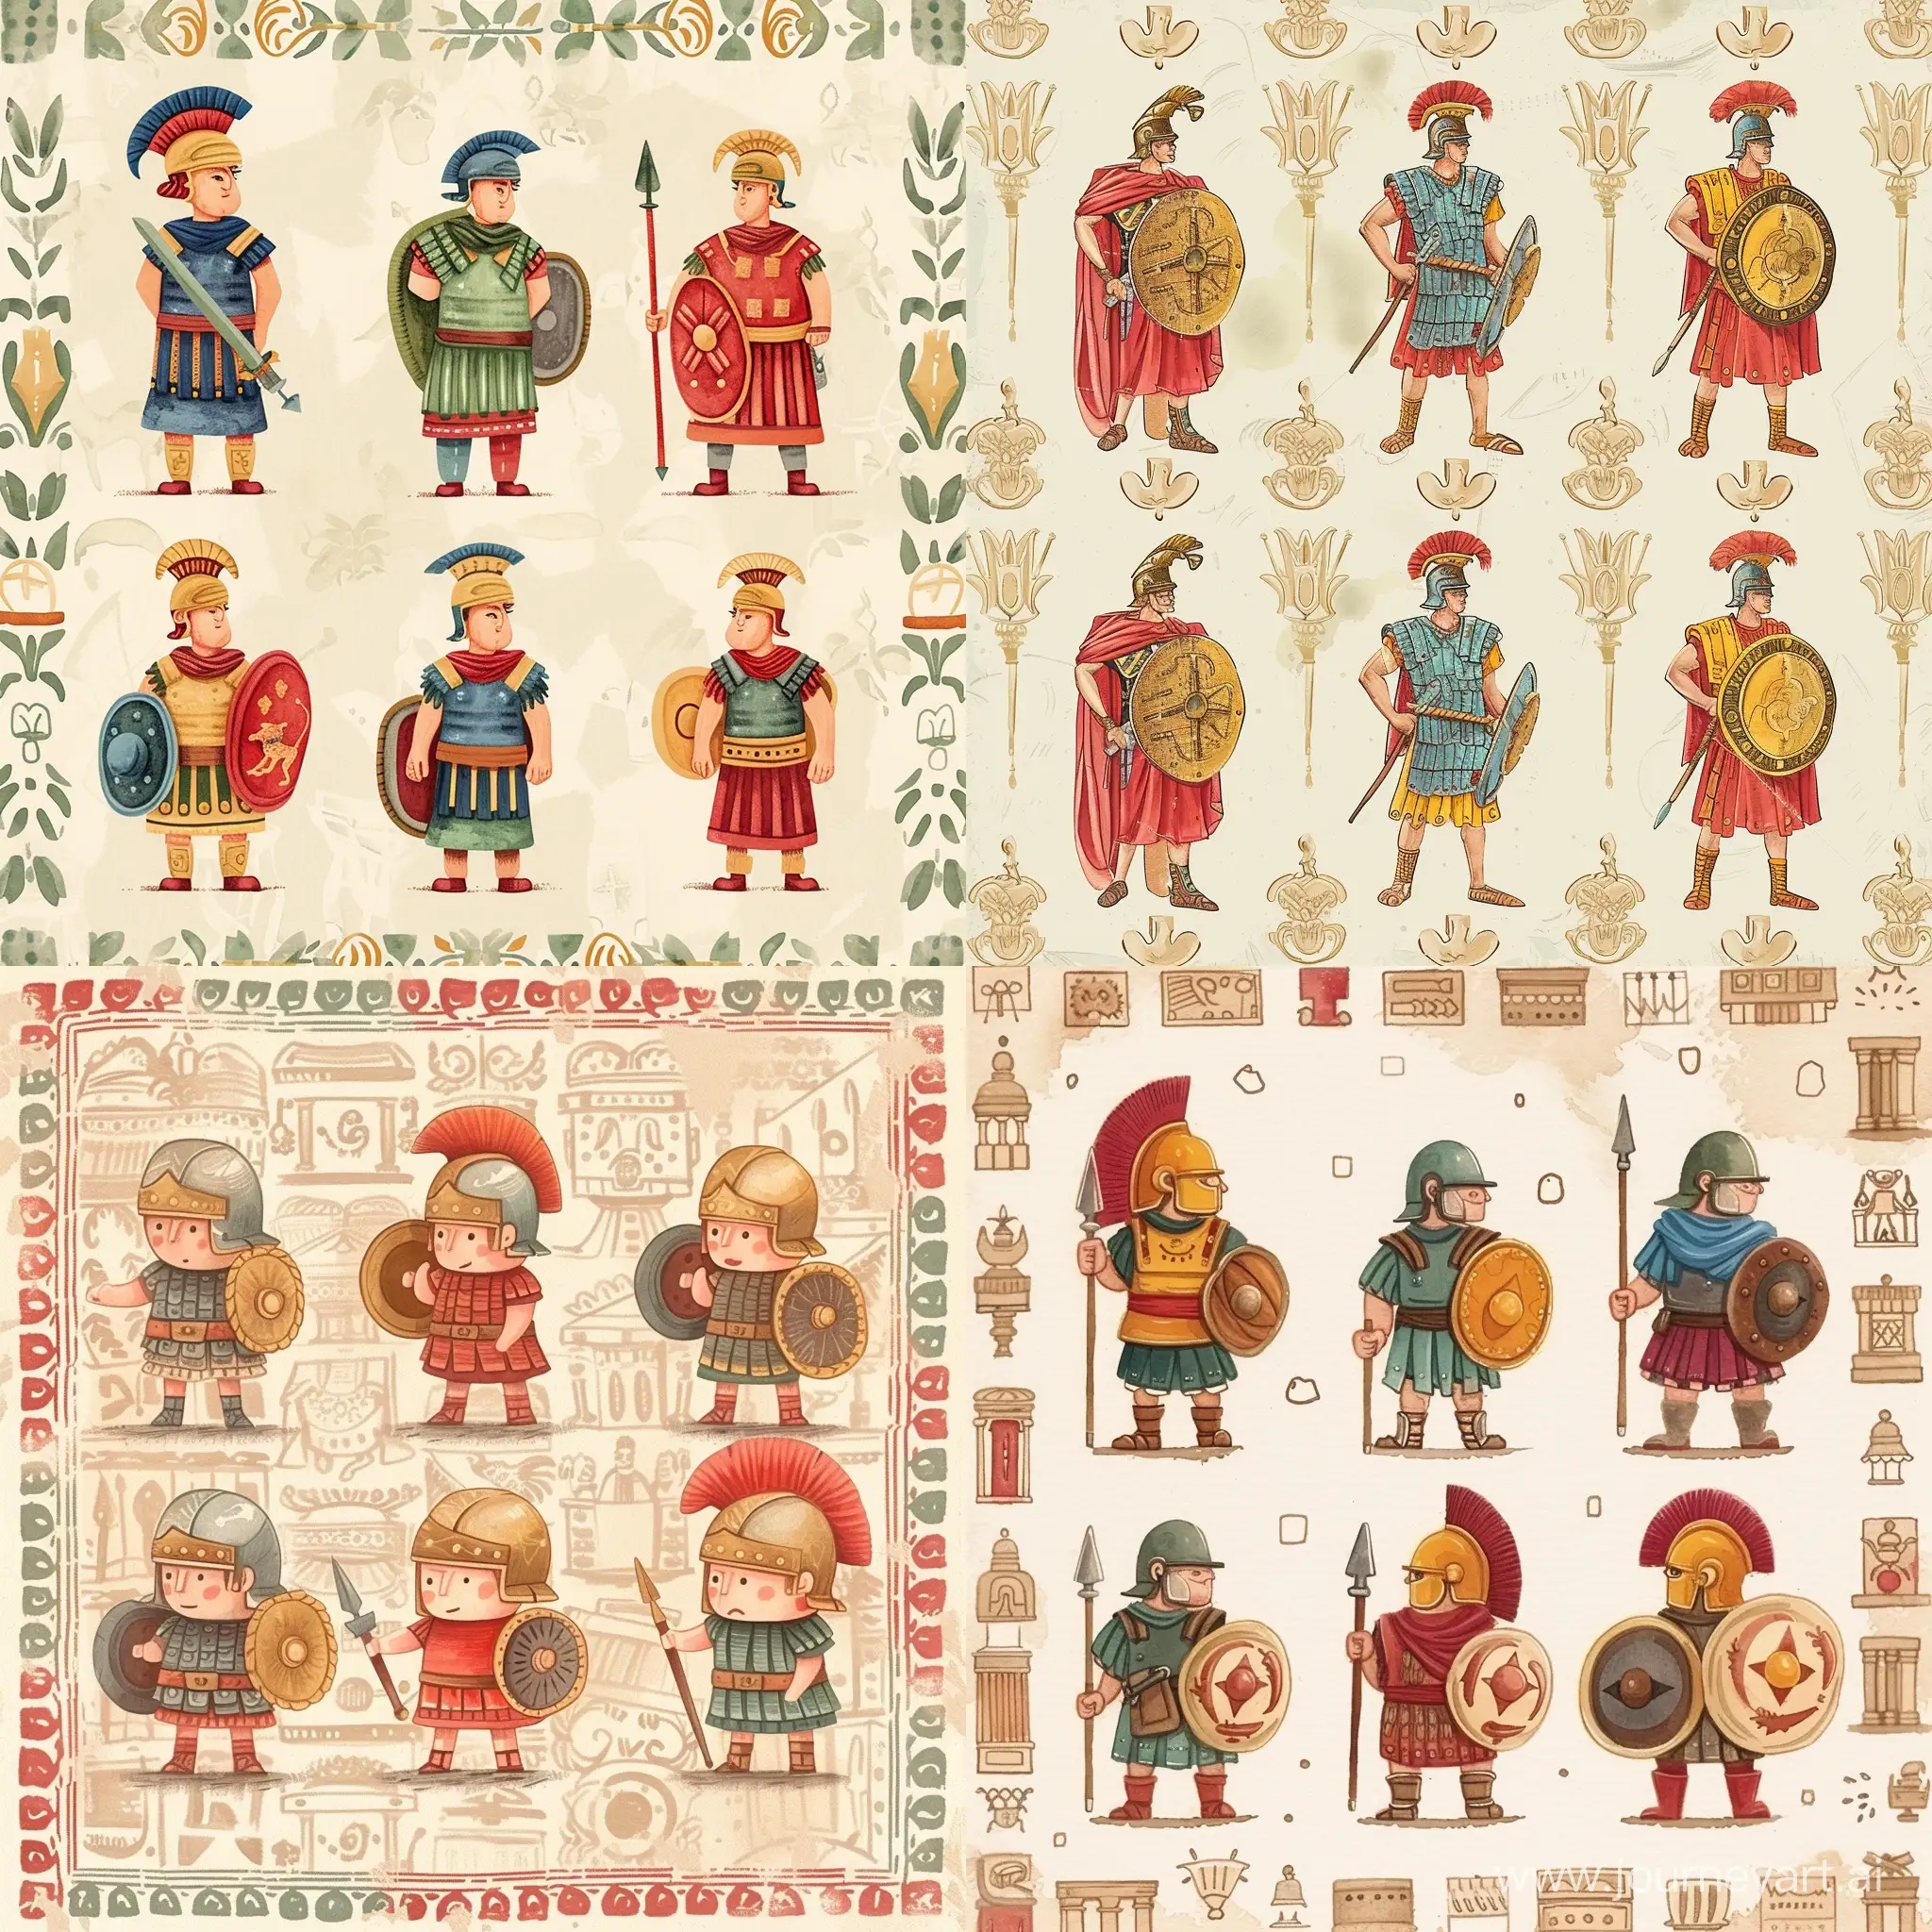 Six small figures of warriors of Ancient Rome, against the background of the pattern of ancient Rome, fabulous illustration, stylized caricature, Victor Nagi, watercolor, decorative, flat drawing